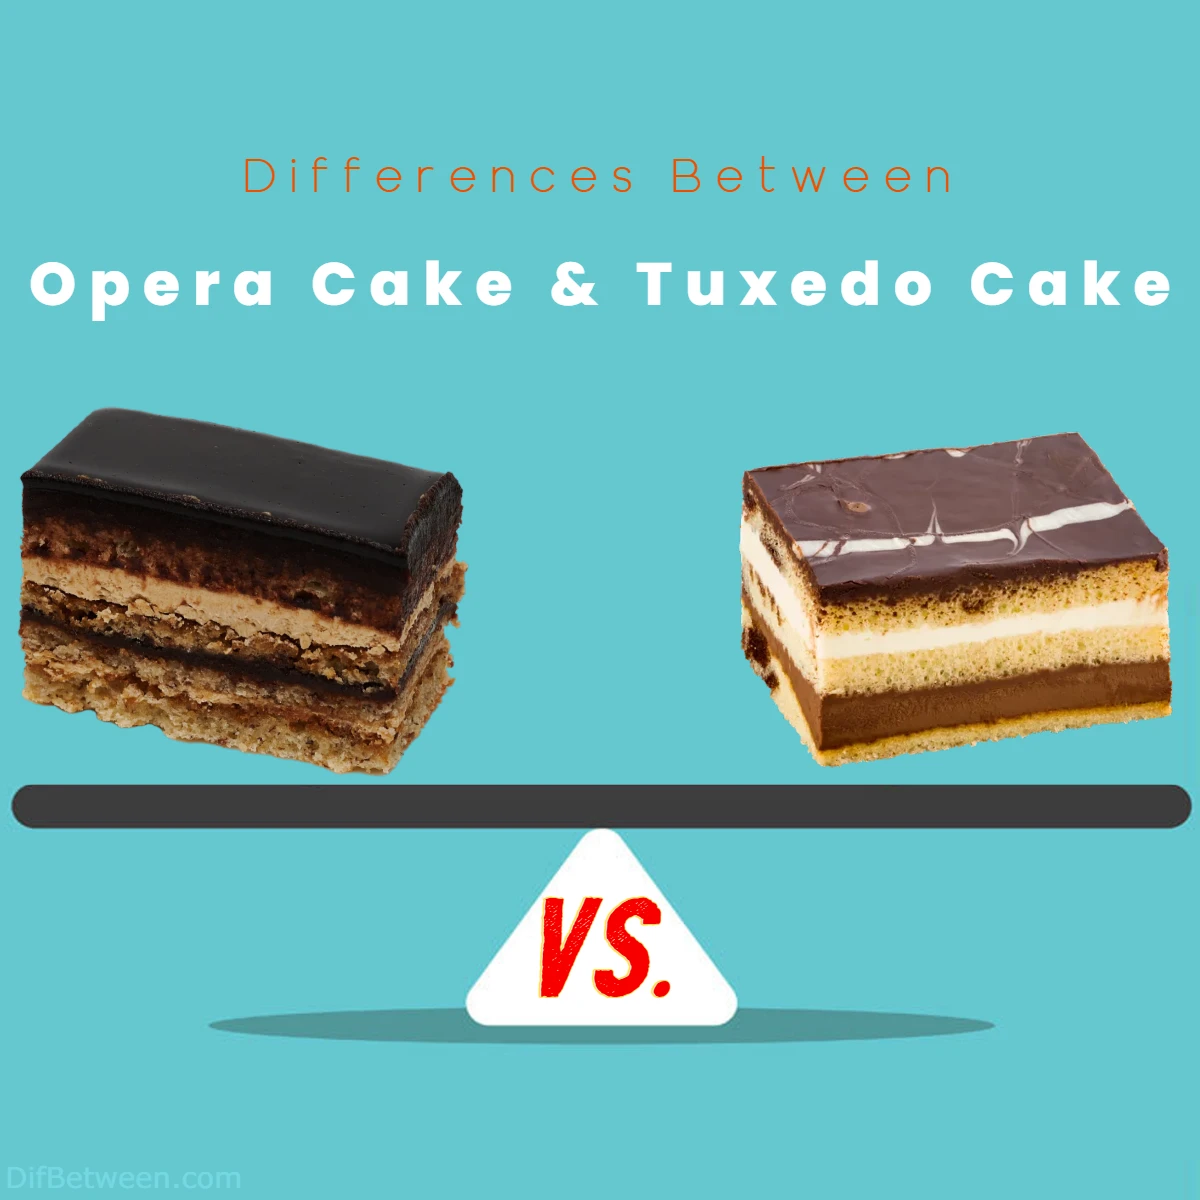 Differences Between Tuxedo Cake and Opera Cake